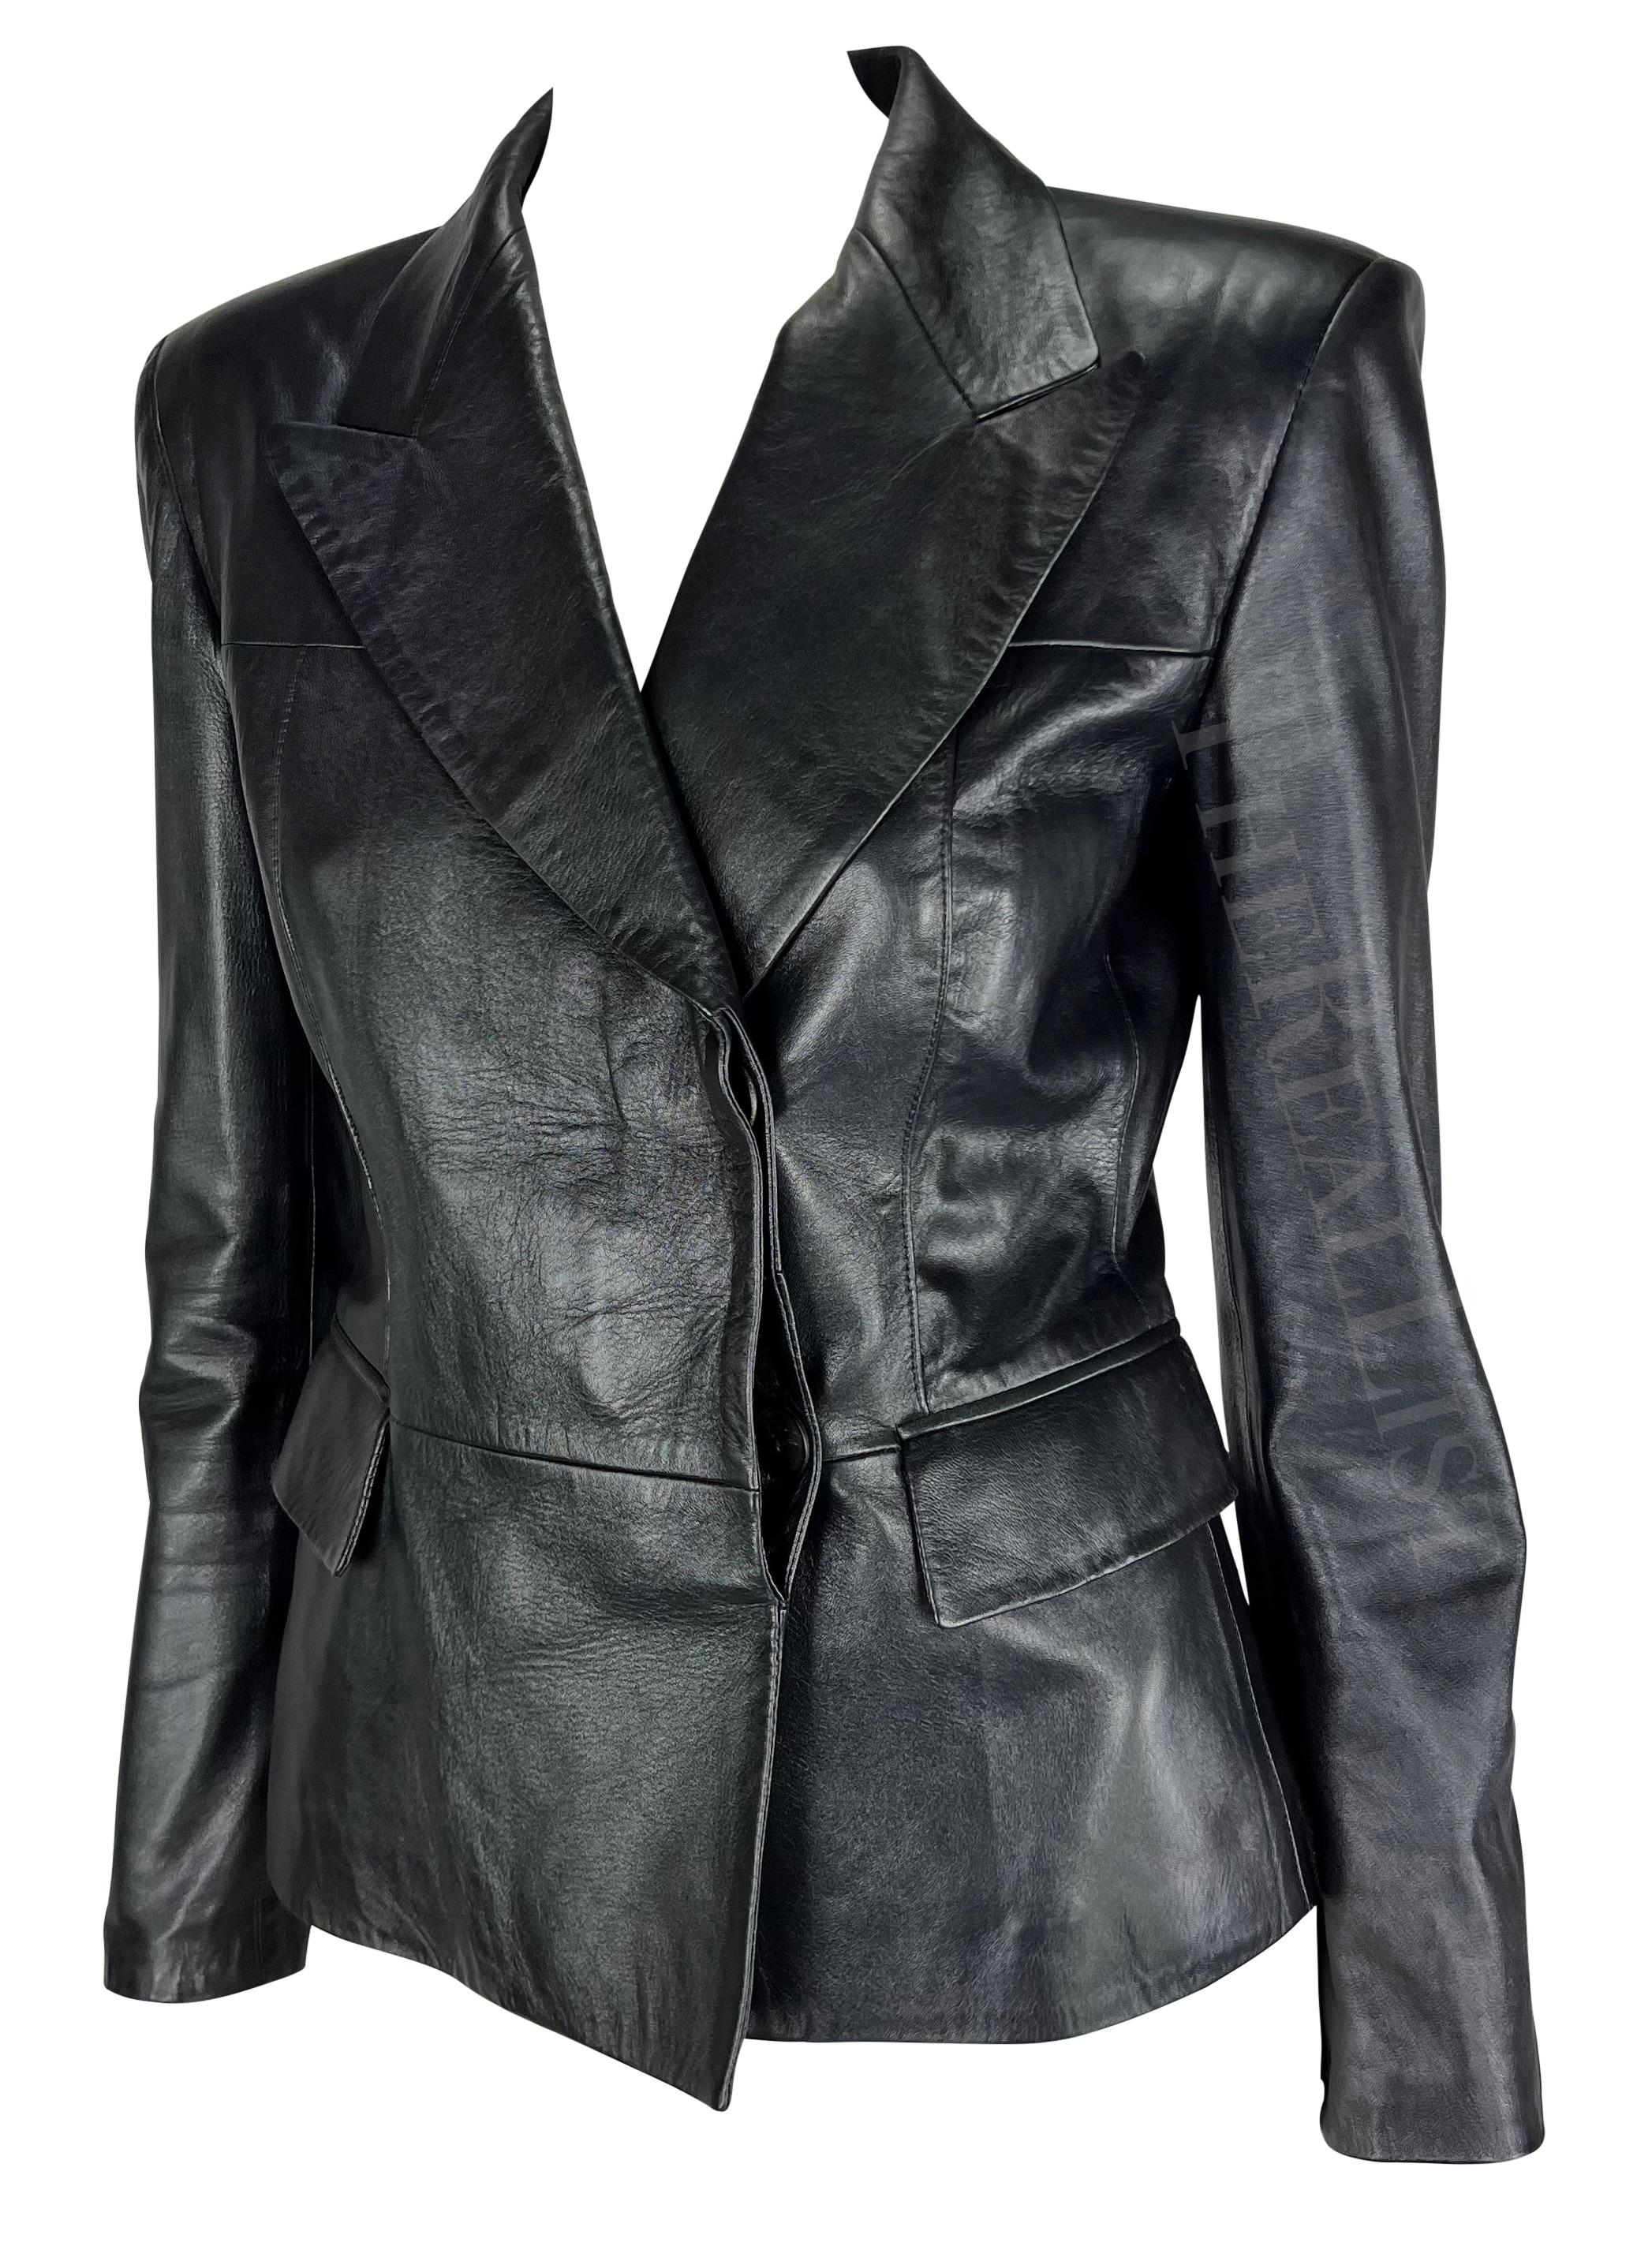 F/W 1997 Gucci by Tom Ford Runway Metallic Black Leather Blazer Jacket In Good Condition For Sale In West Hollywood, CA